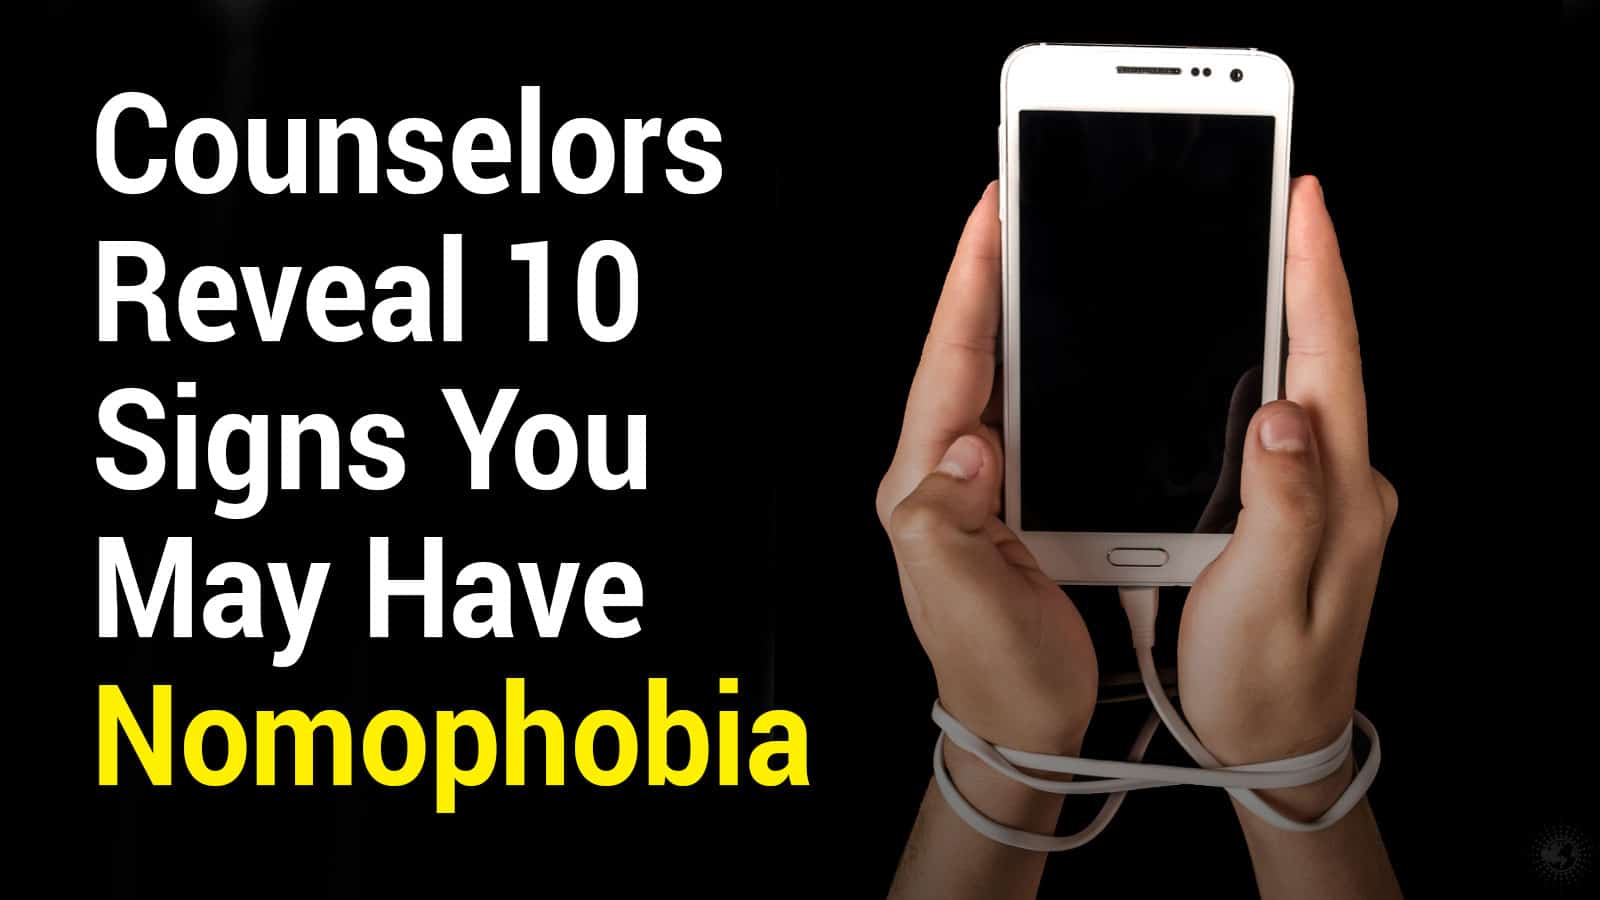 Counselors Reveal 10 Signs You May Have Nomophobia